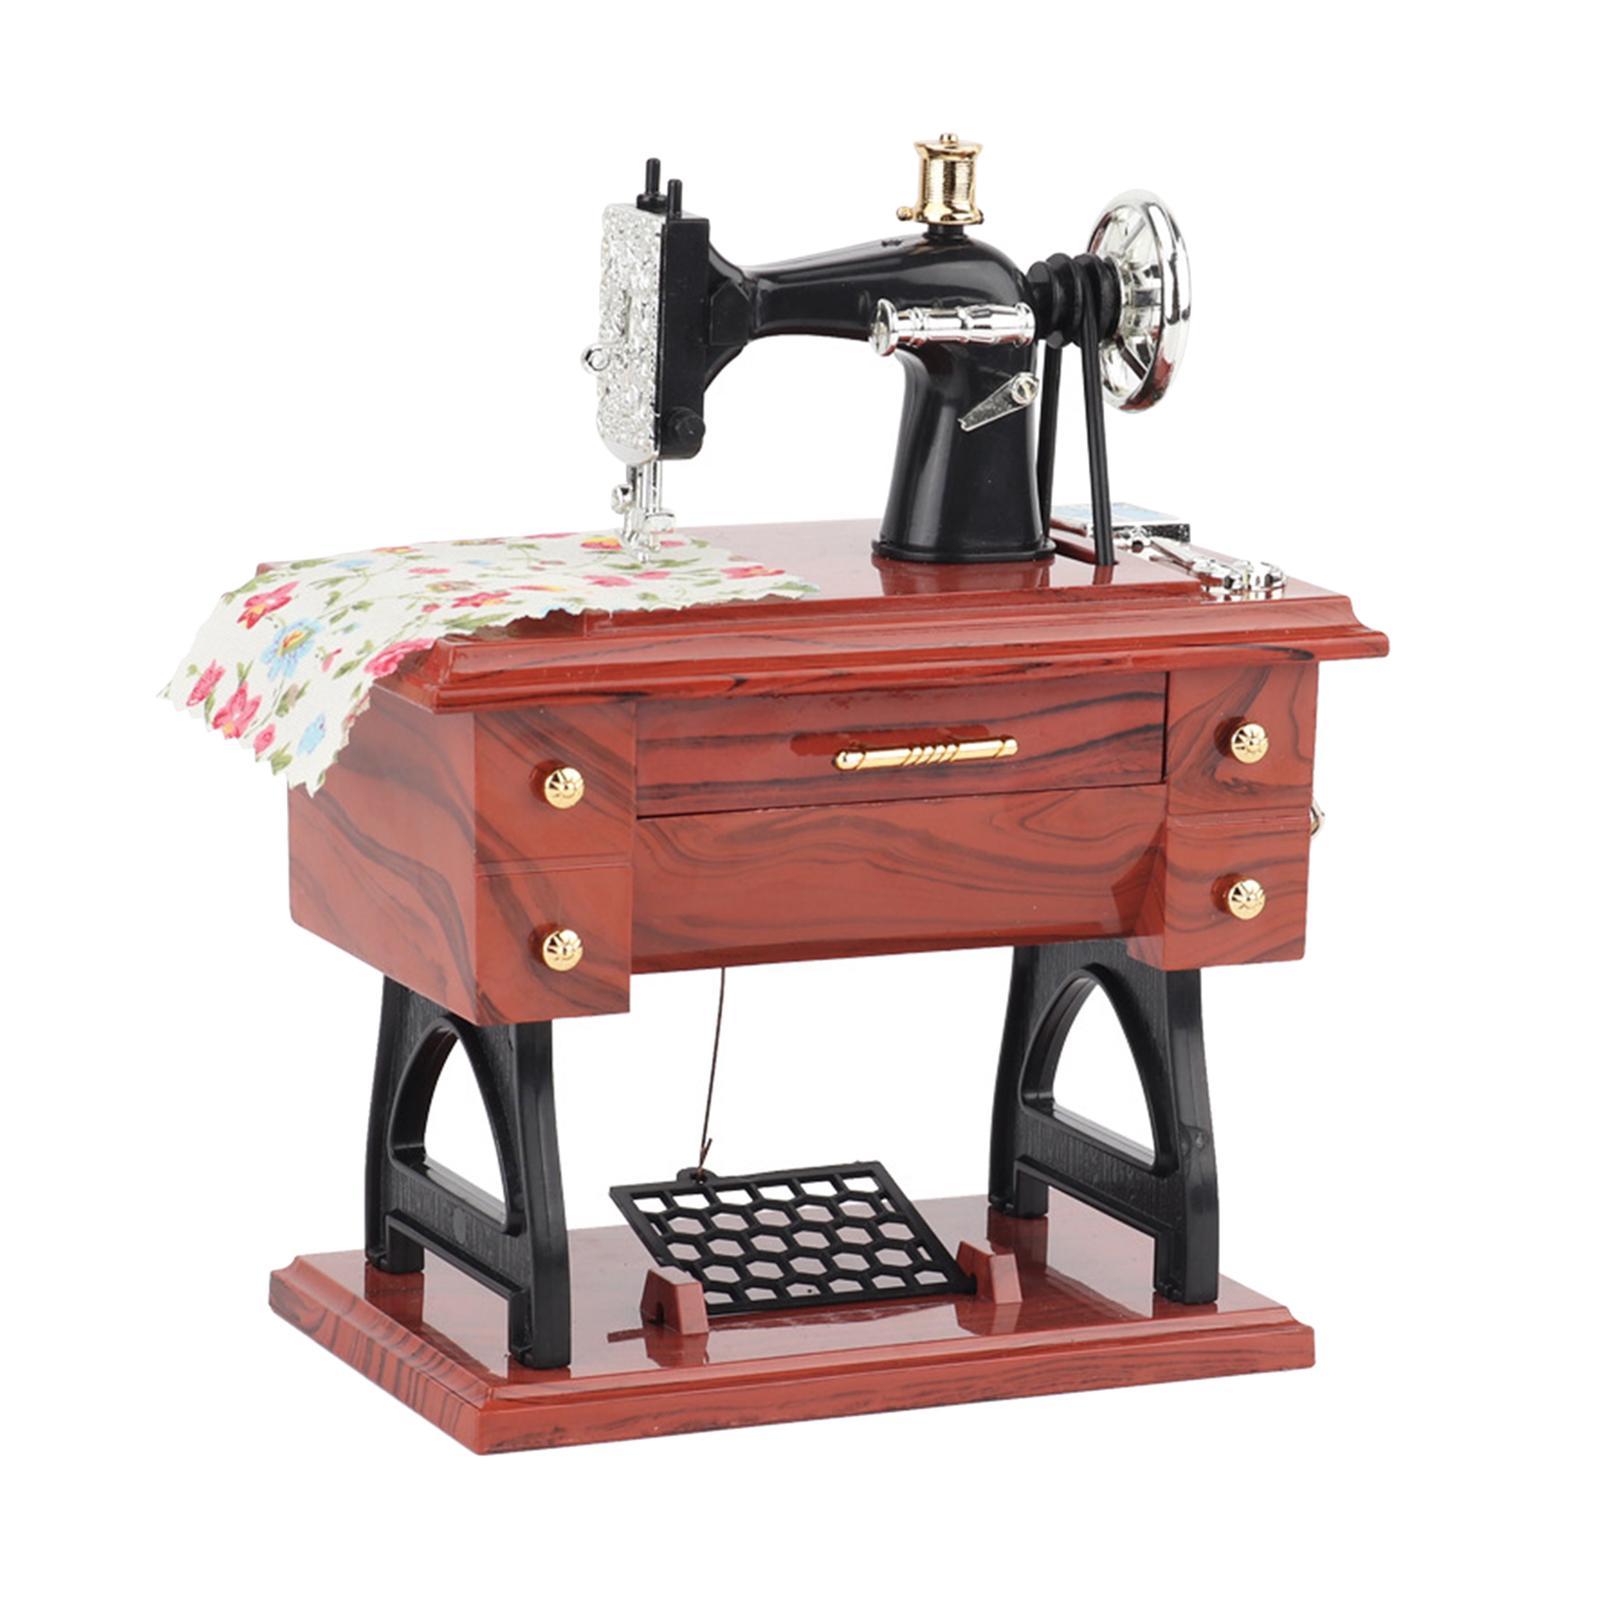 Sewing Machine Music Box Mechanical Music Box Table Decor for Desk Ornament Musical Gifts